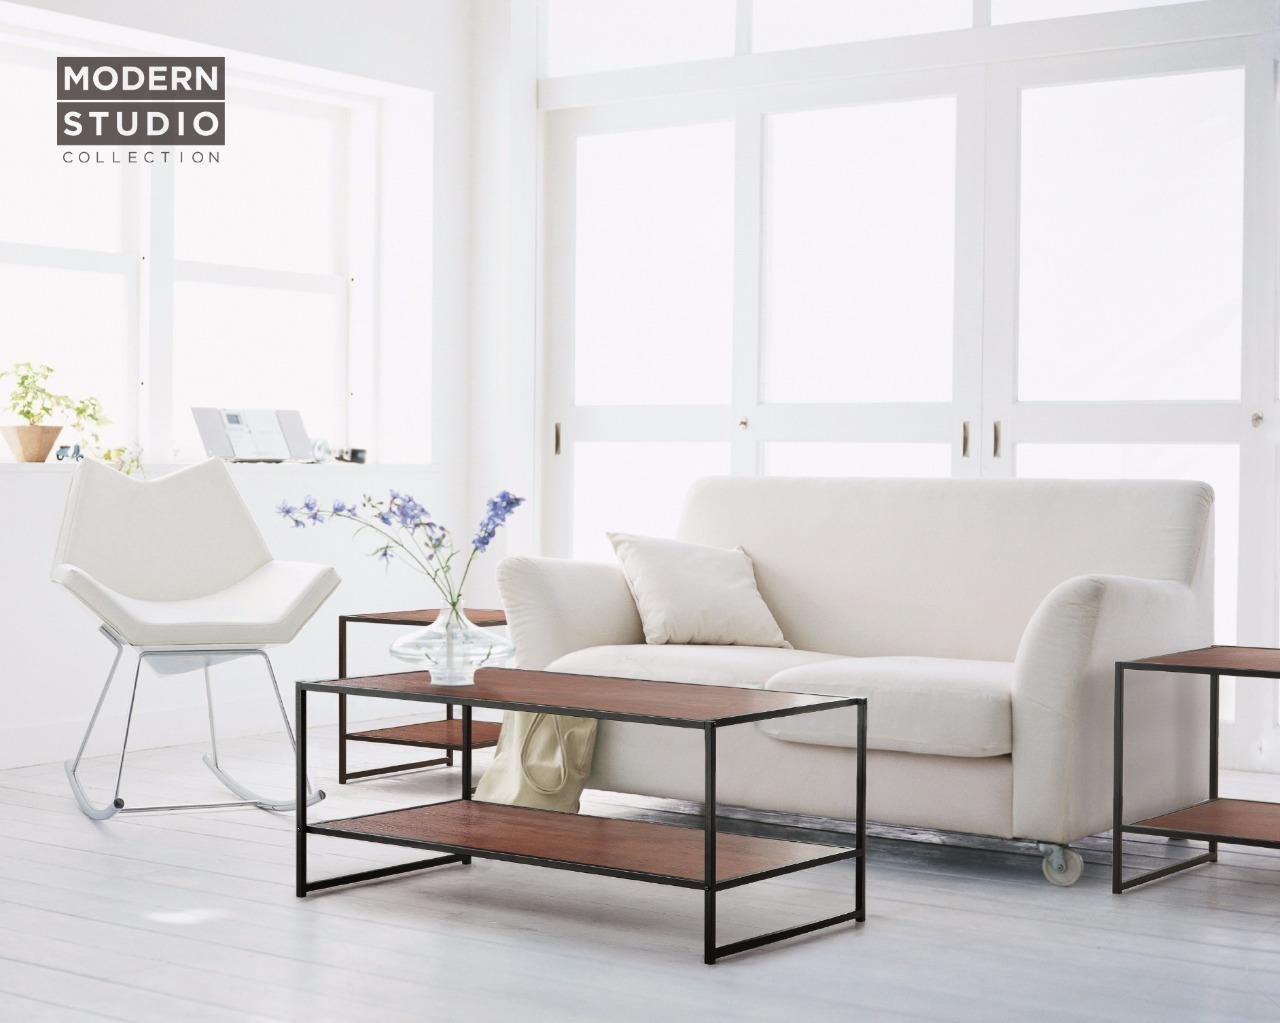 A set of coffee tables from Modern Studio